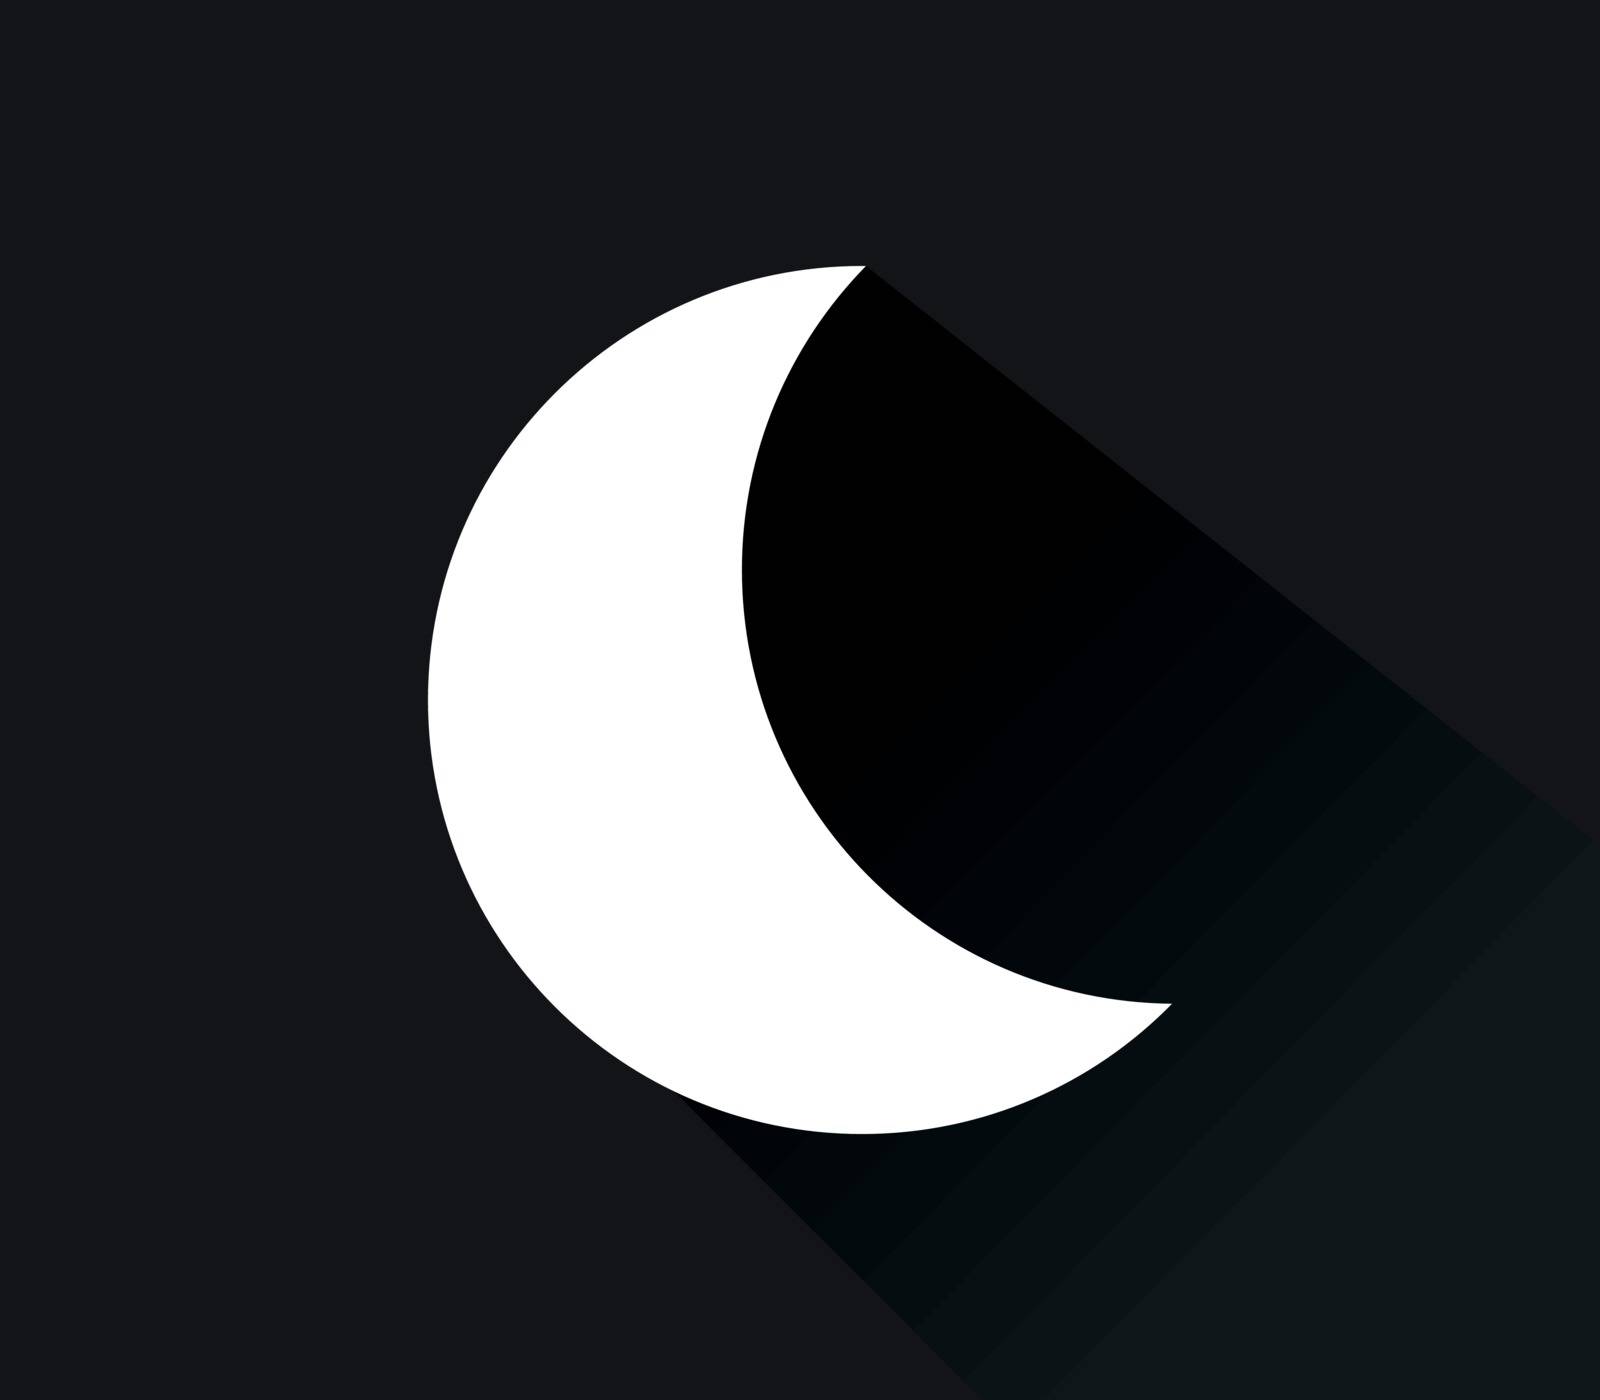 moon icon by Mark1987